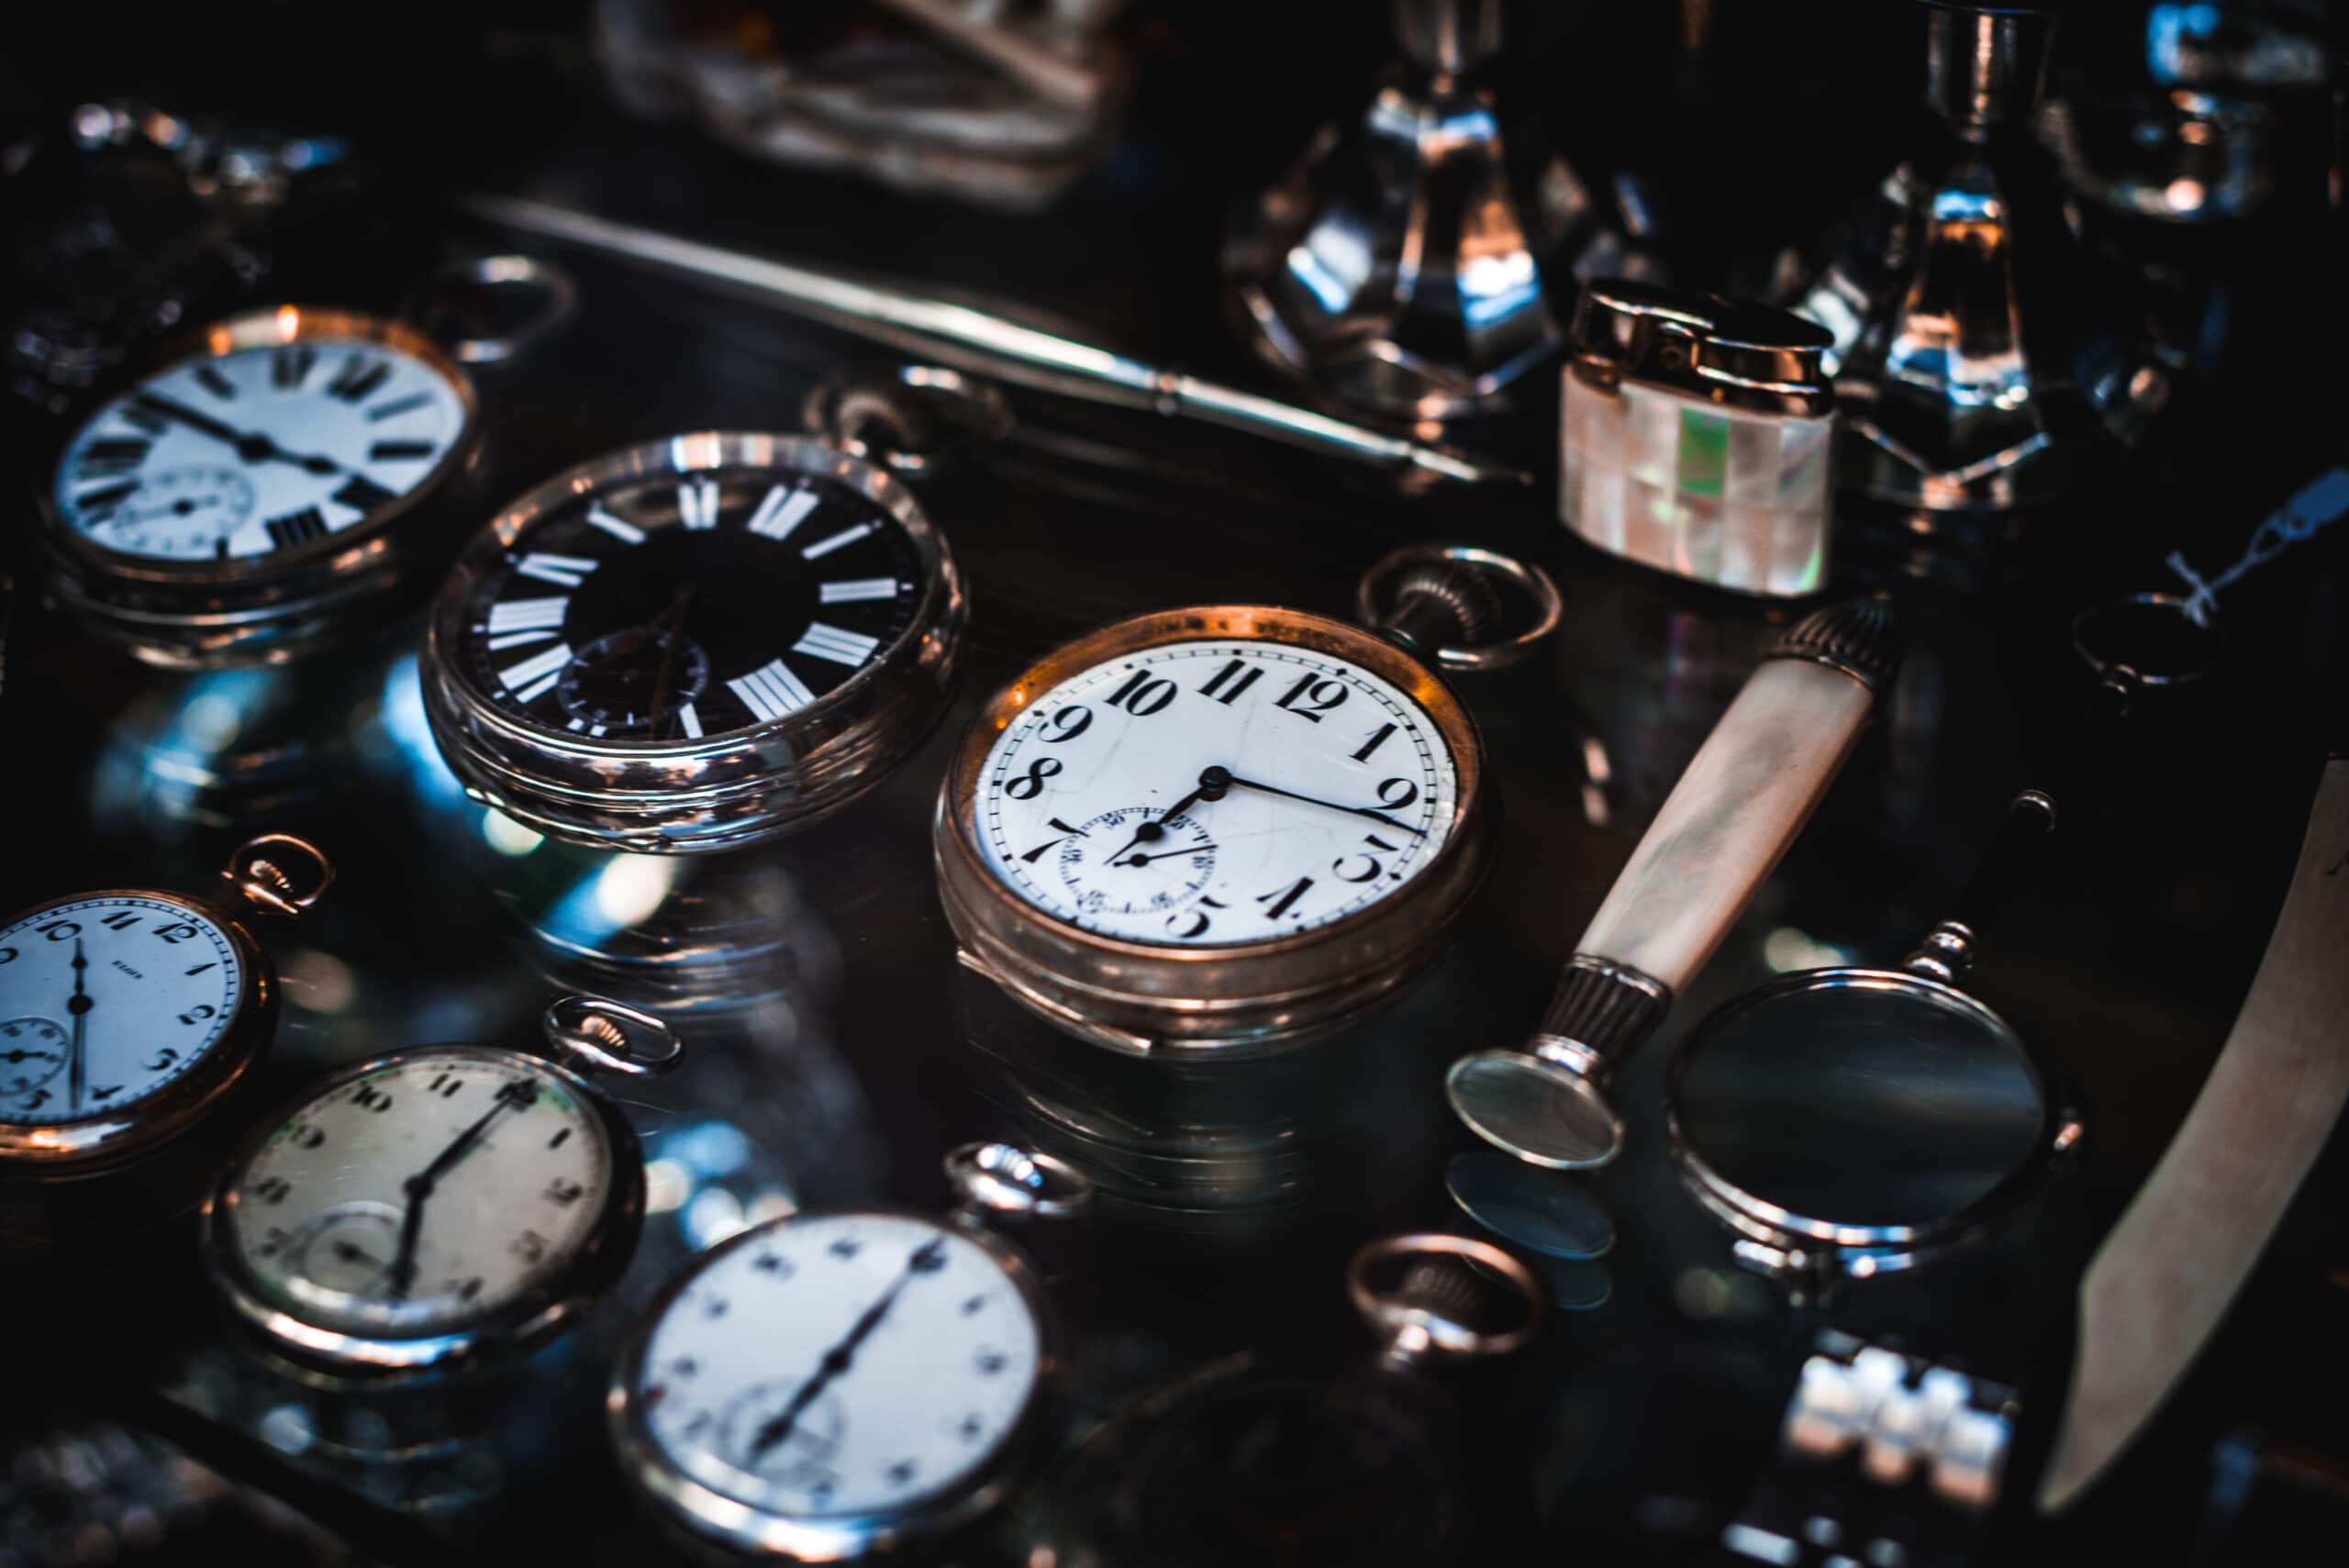 Vintage analog clock surrounded by other vintage cloks in a dark photo